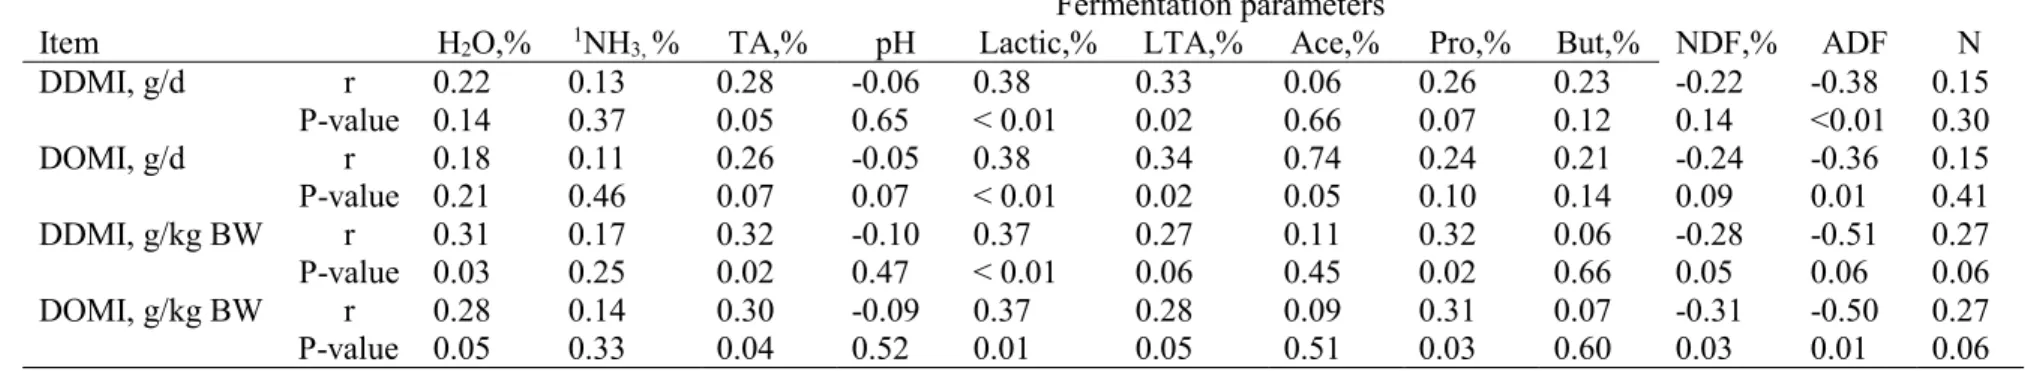 Table 3.3: Pearson correlation coefficients between fermentation characteristics and digestible DM and digestible OM   measurements of alfalfa silage in gestating sheep